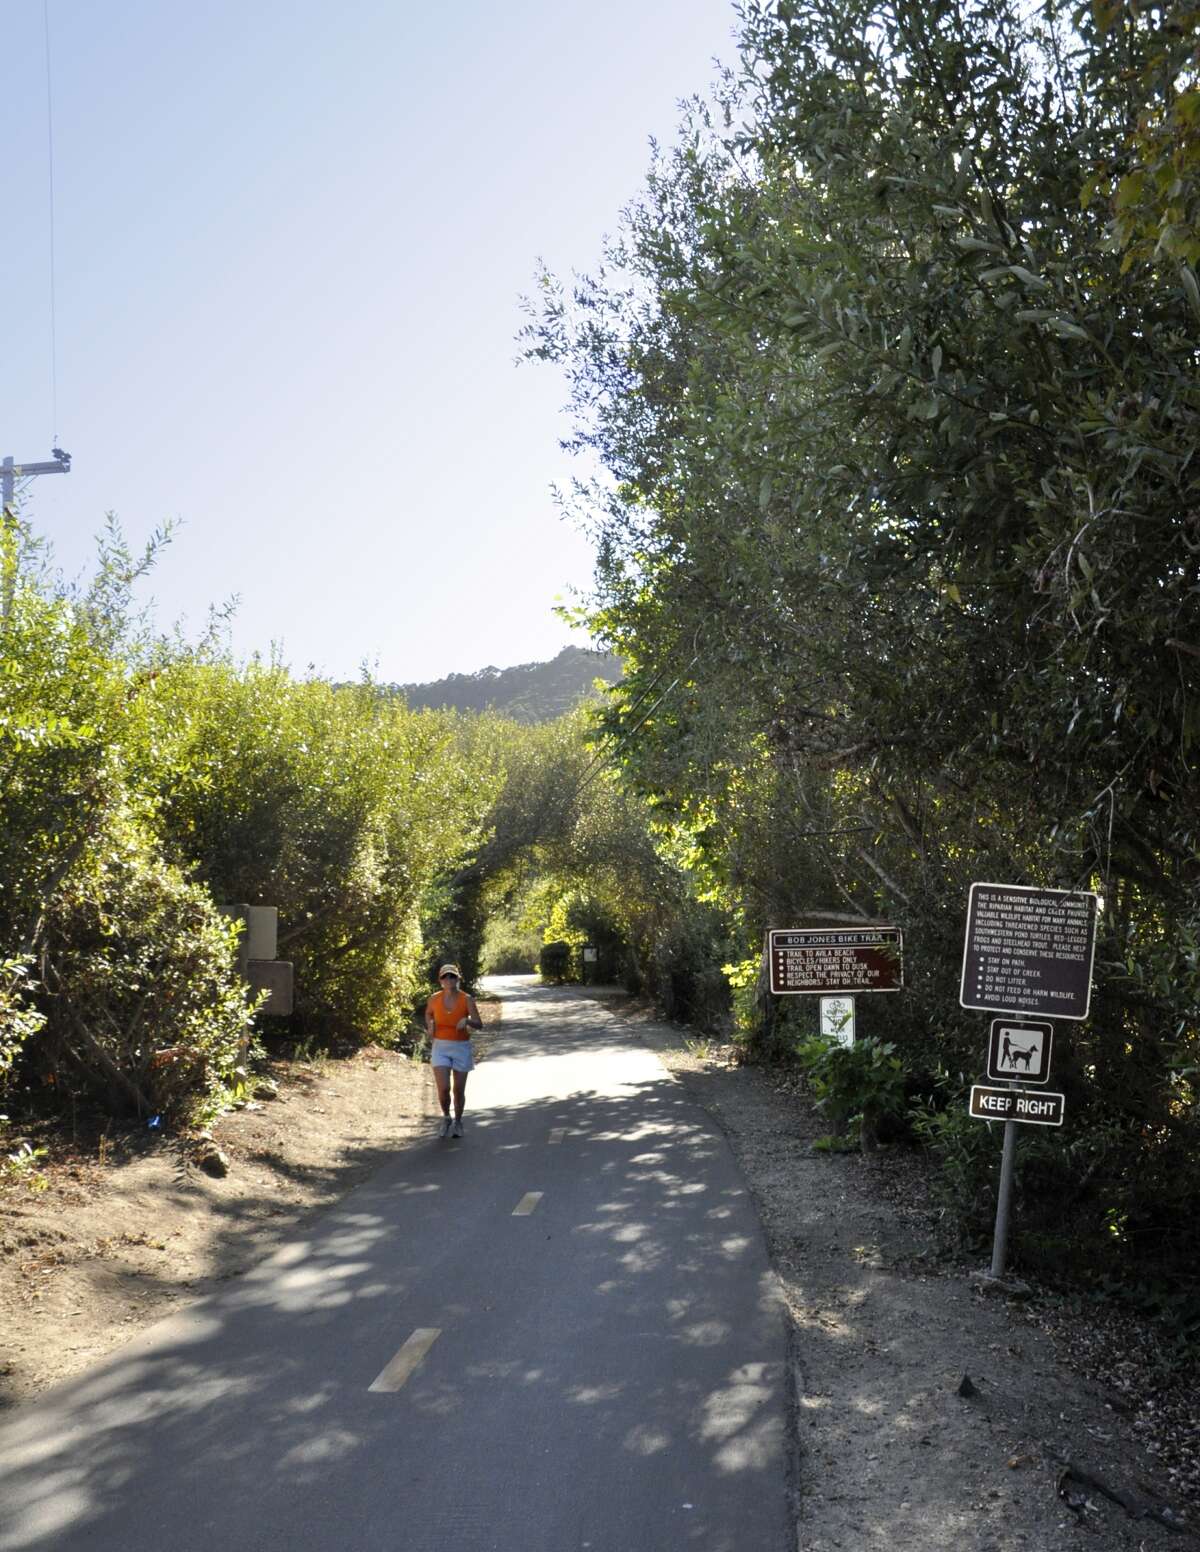 Bob Jones Trail, Avila Beach: Officially a bike path, this winding, forested "City to the Sea" trail also takes hikers and joggers along 12 miles of the old Pacific Coast Railroad right-of-way. The 2.5-mile section from Ontario Road (exit Highway 101 at San Luis Bay Drive) to Avila Beach and the ocean is a meandering, forested path following San Luis Creek that's popular with families and is dog-friendly.